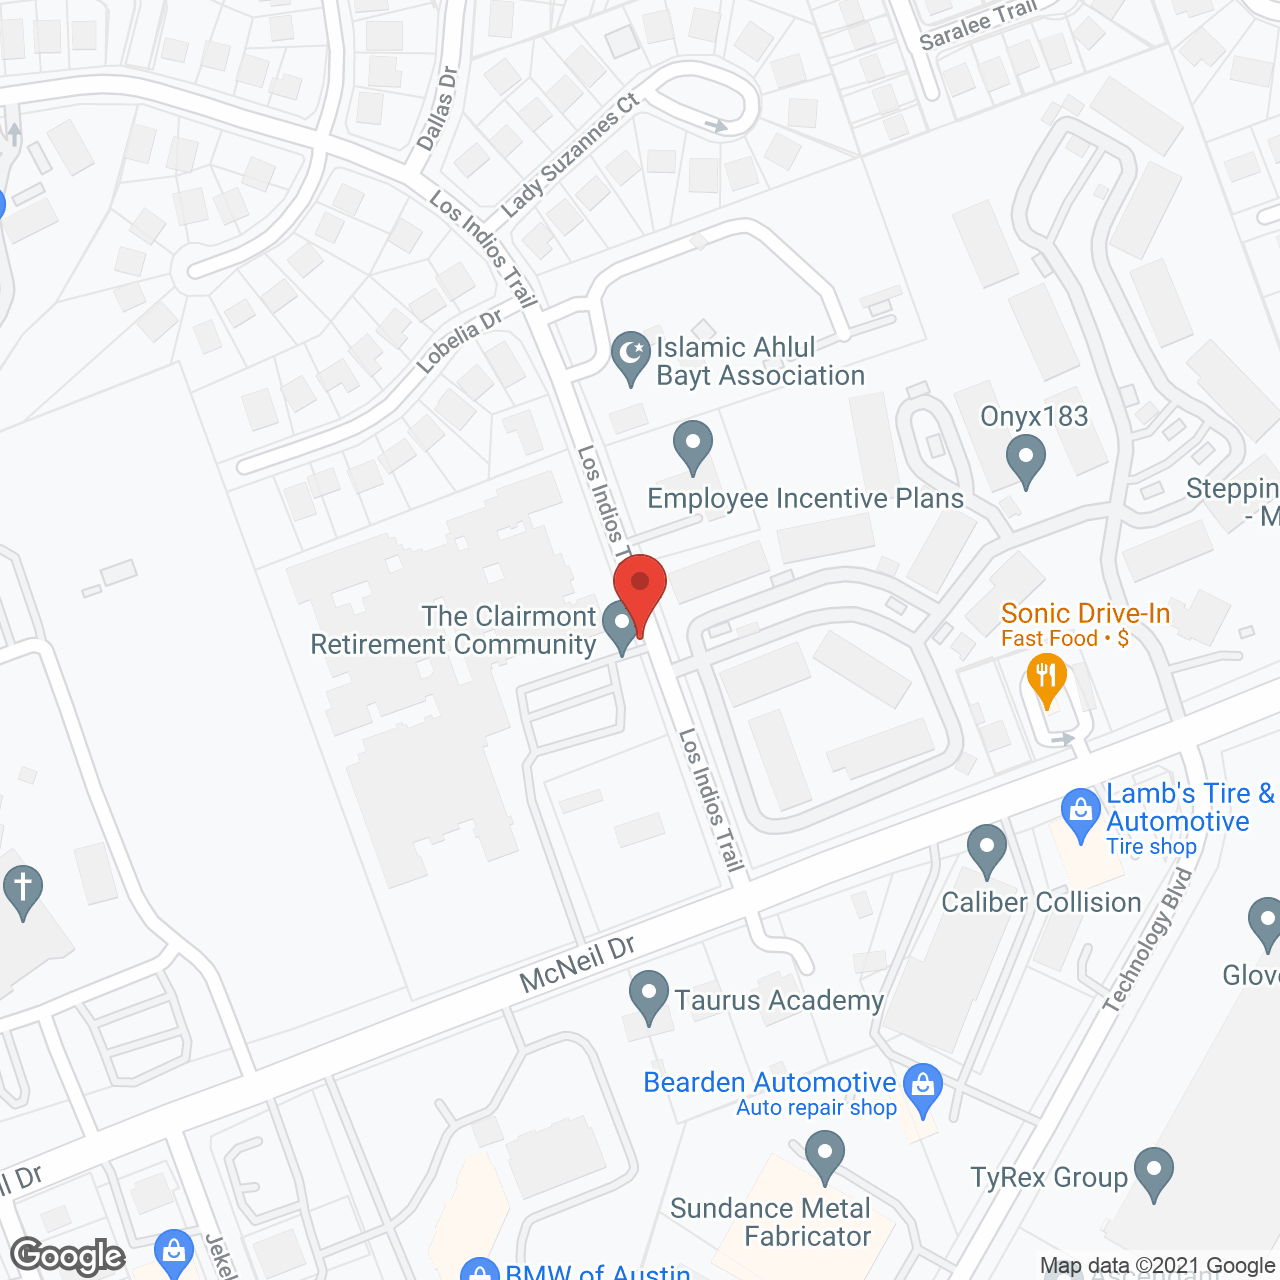 The Clairmont Retirement Community in google map